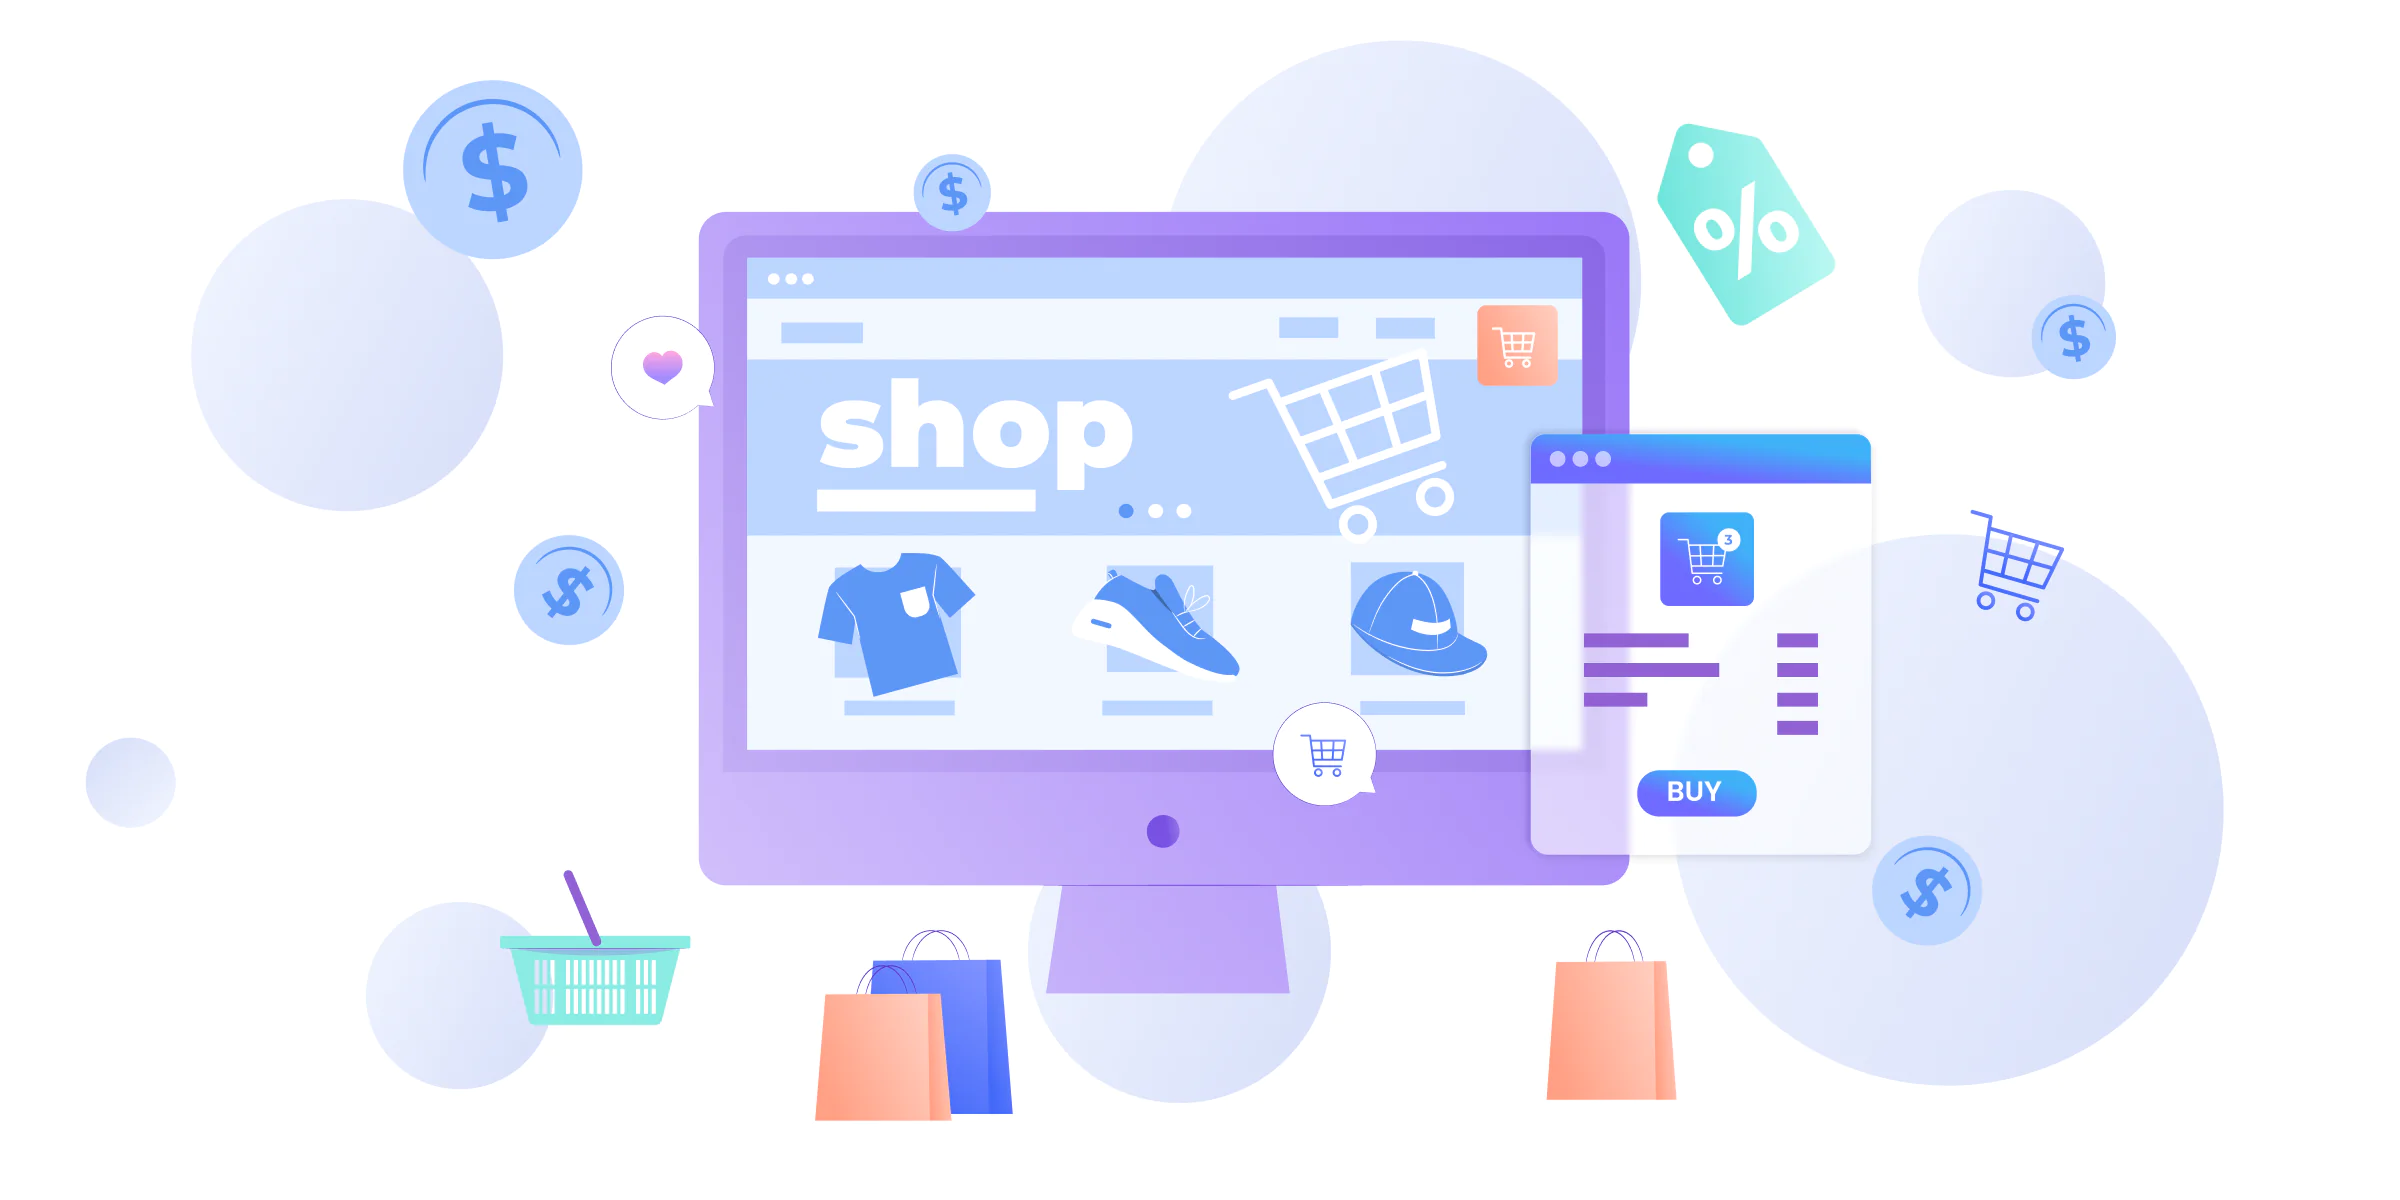 How to choose the best end-to-end eCommerce solution development platform?